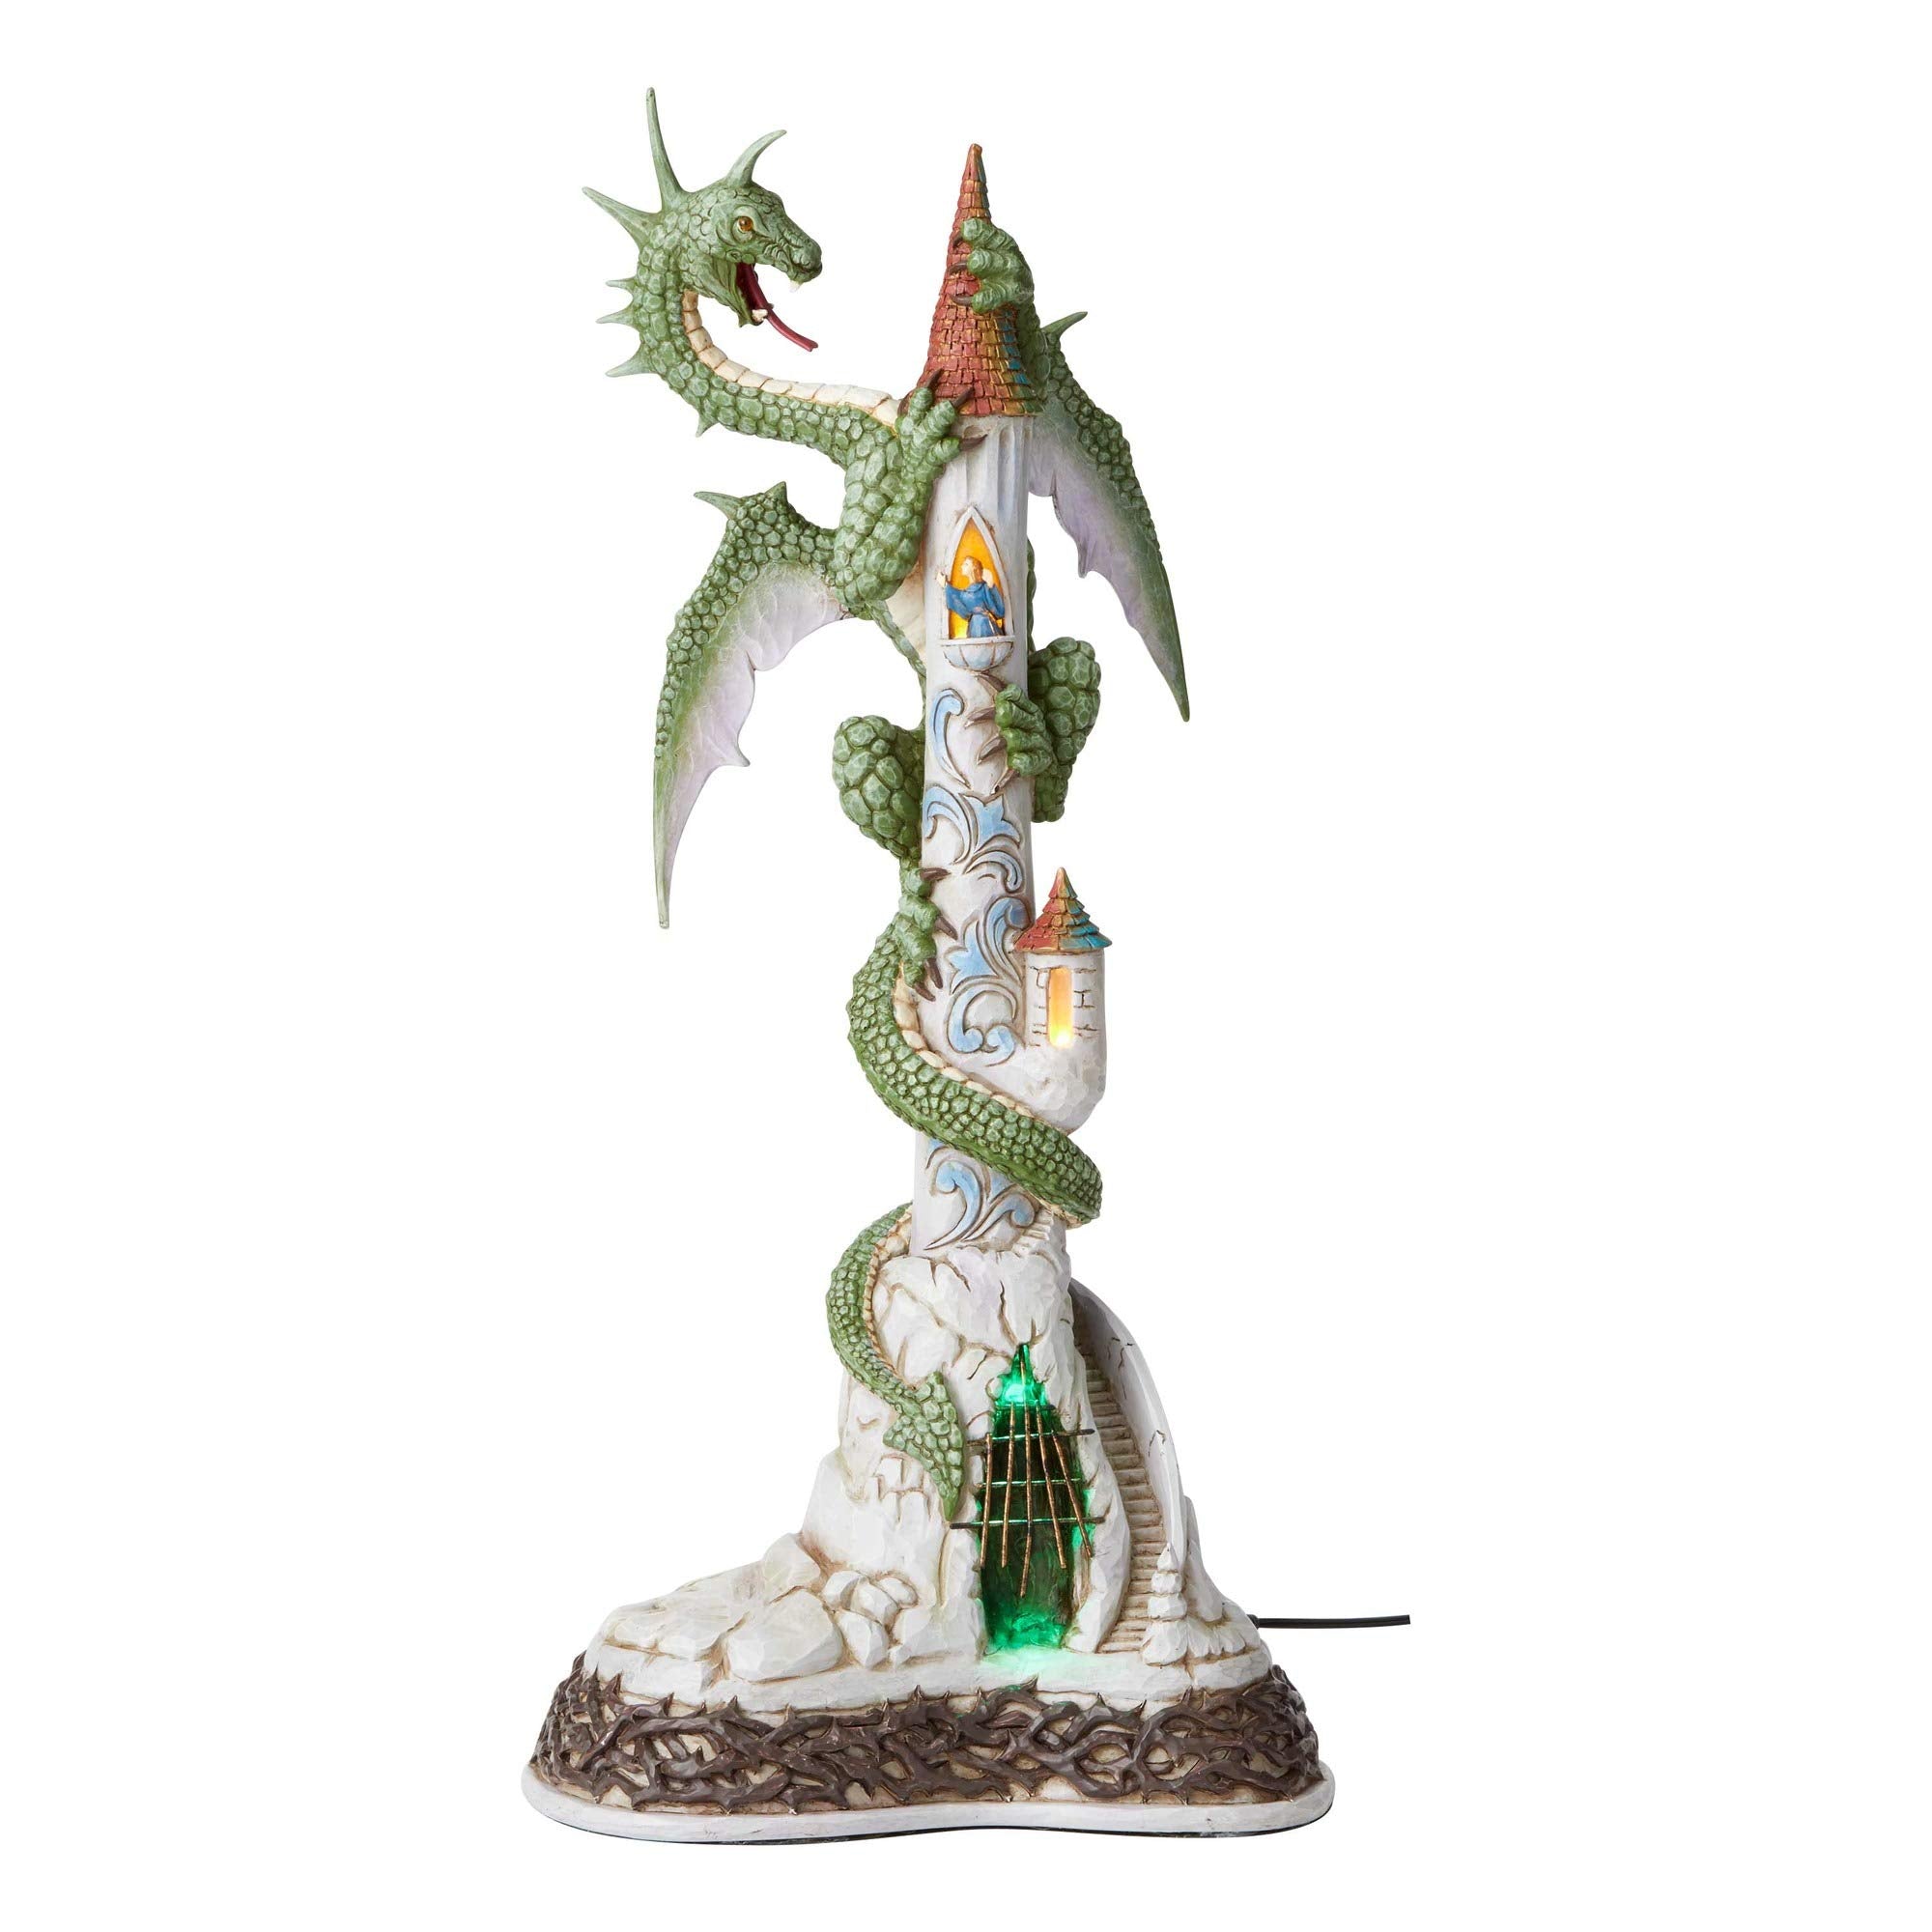 Enesco Jim Shore Heartwood Creek Limited Ed Lighted Dragon, 18.5 inches High